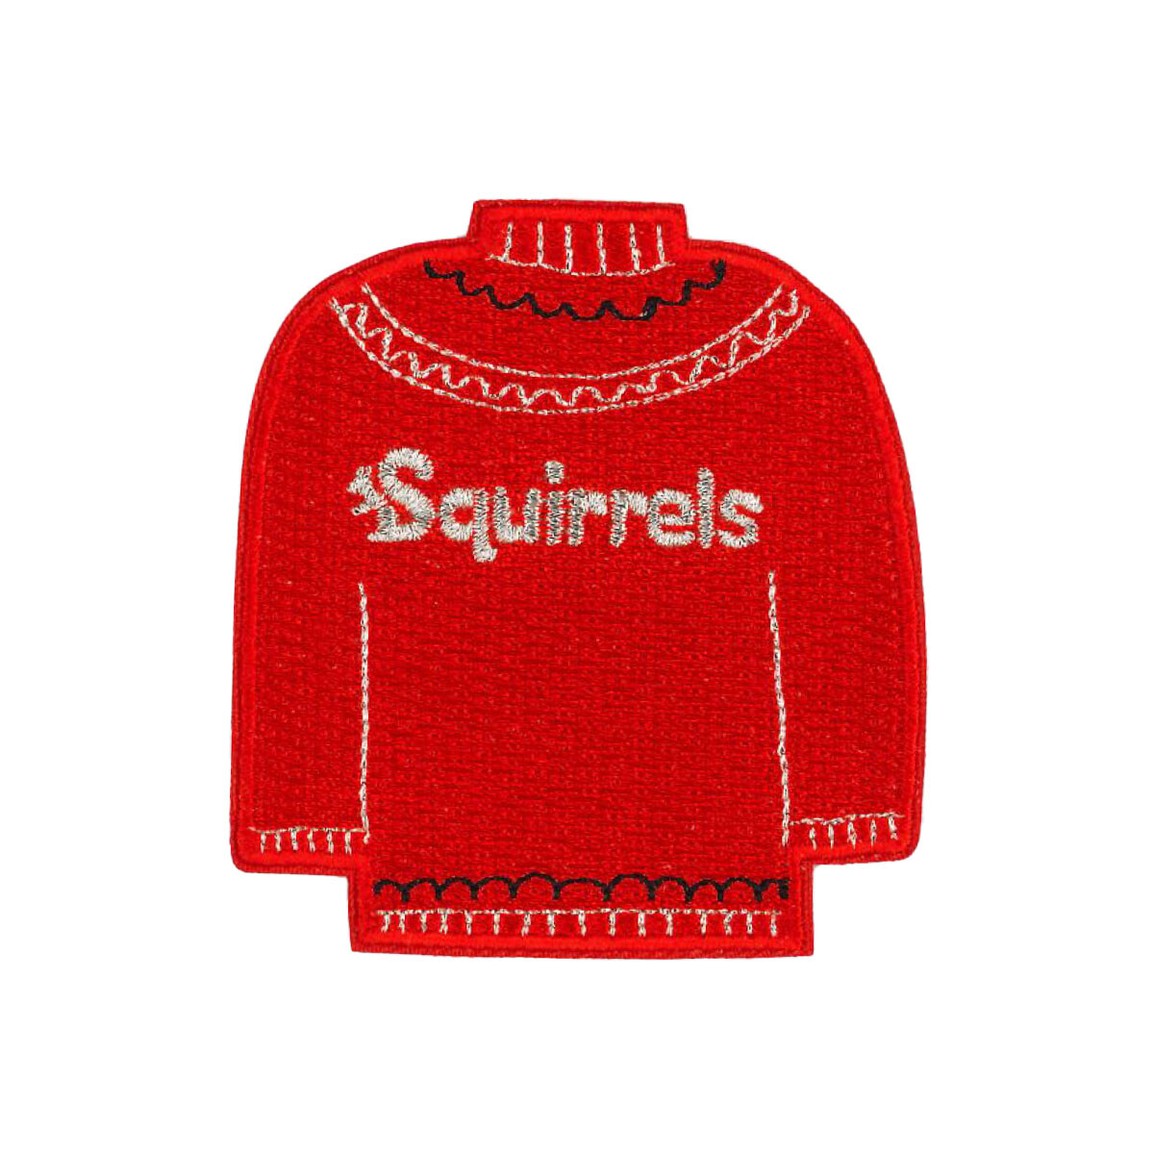 Squirrel Scouts Christmas Jumper Blanket Badge